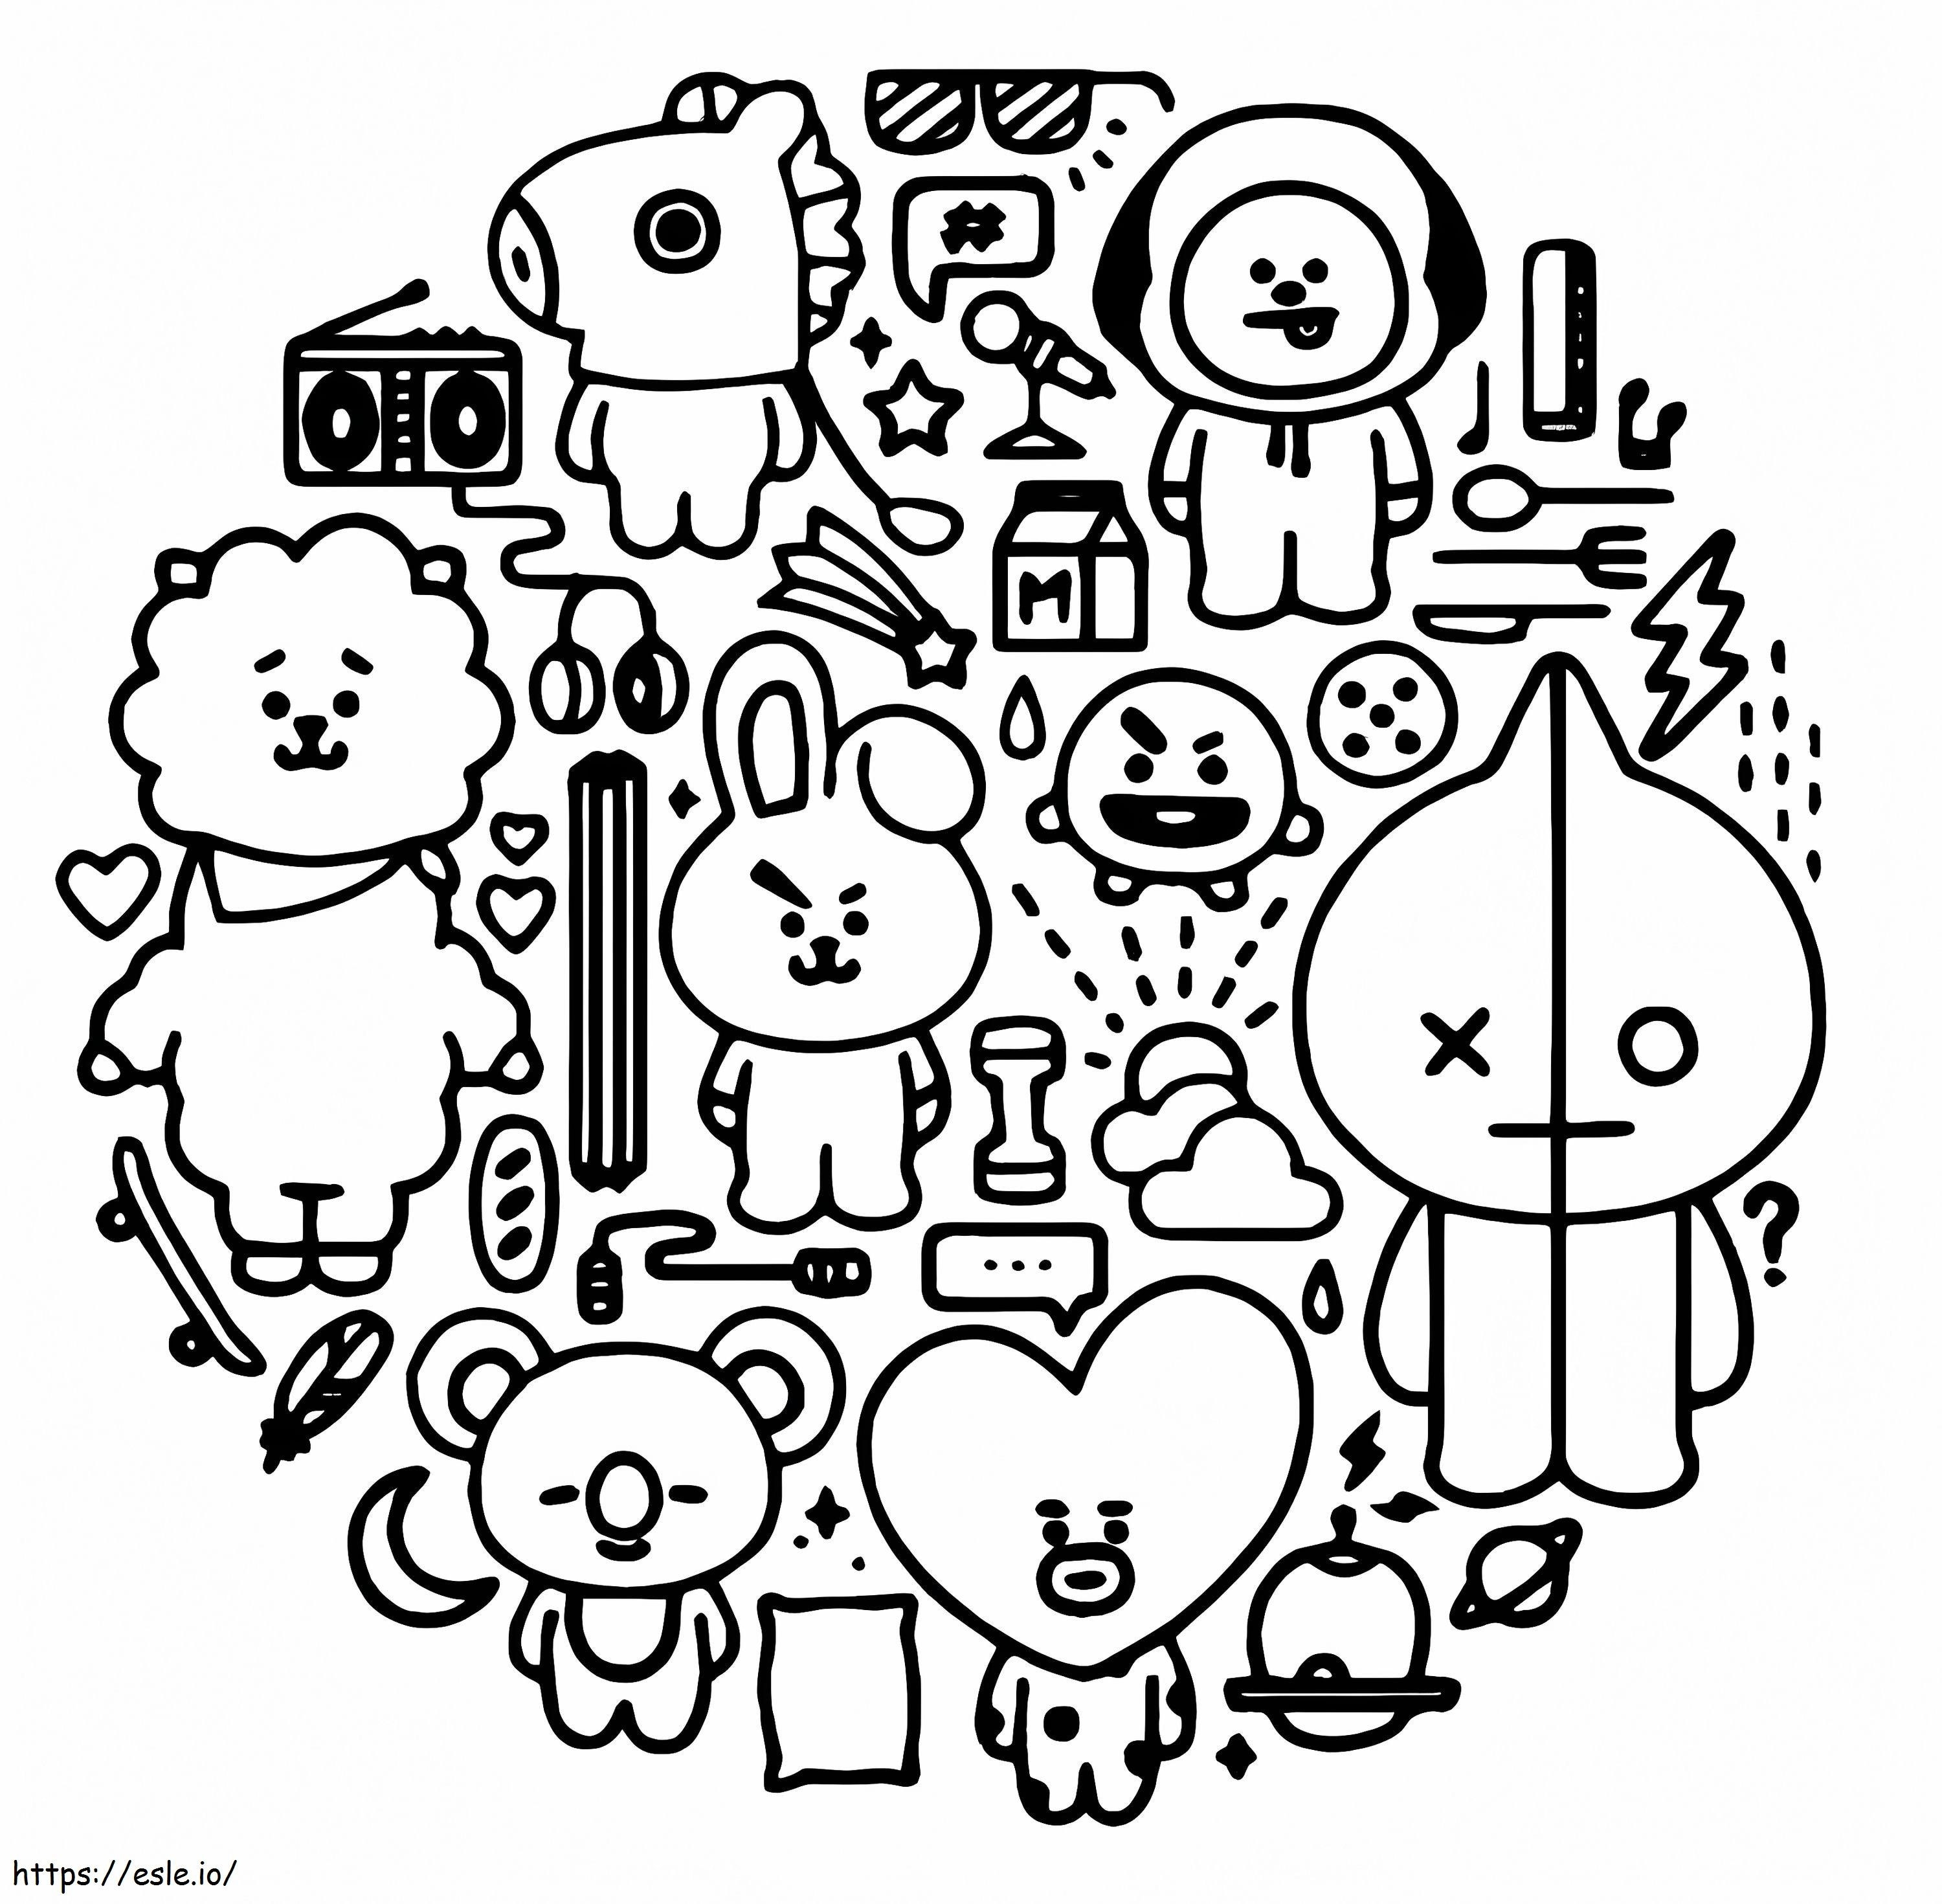 Adorable BT21 coloring page